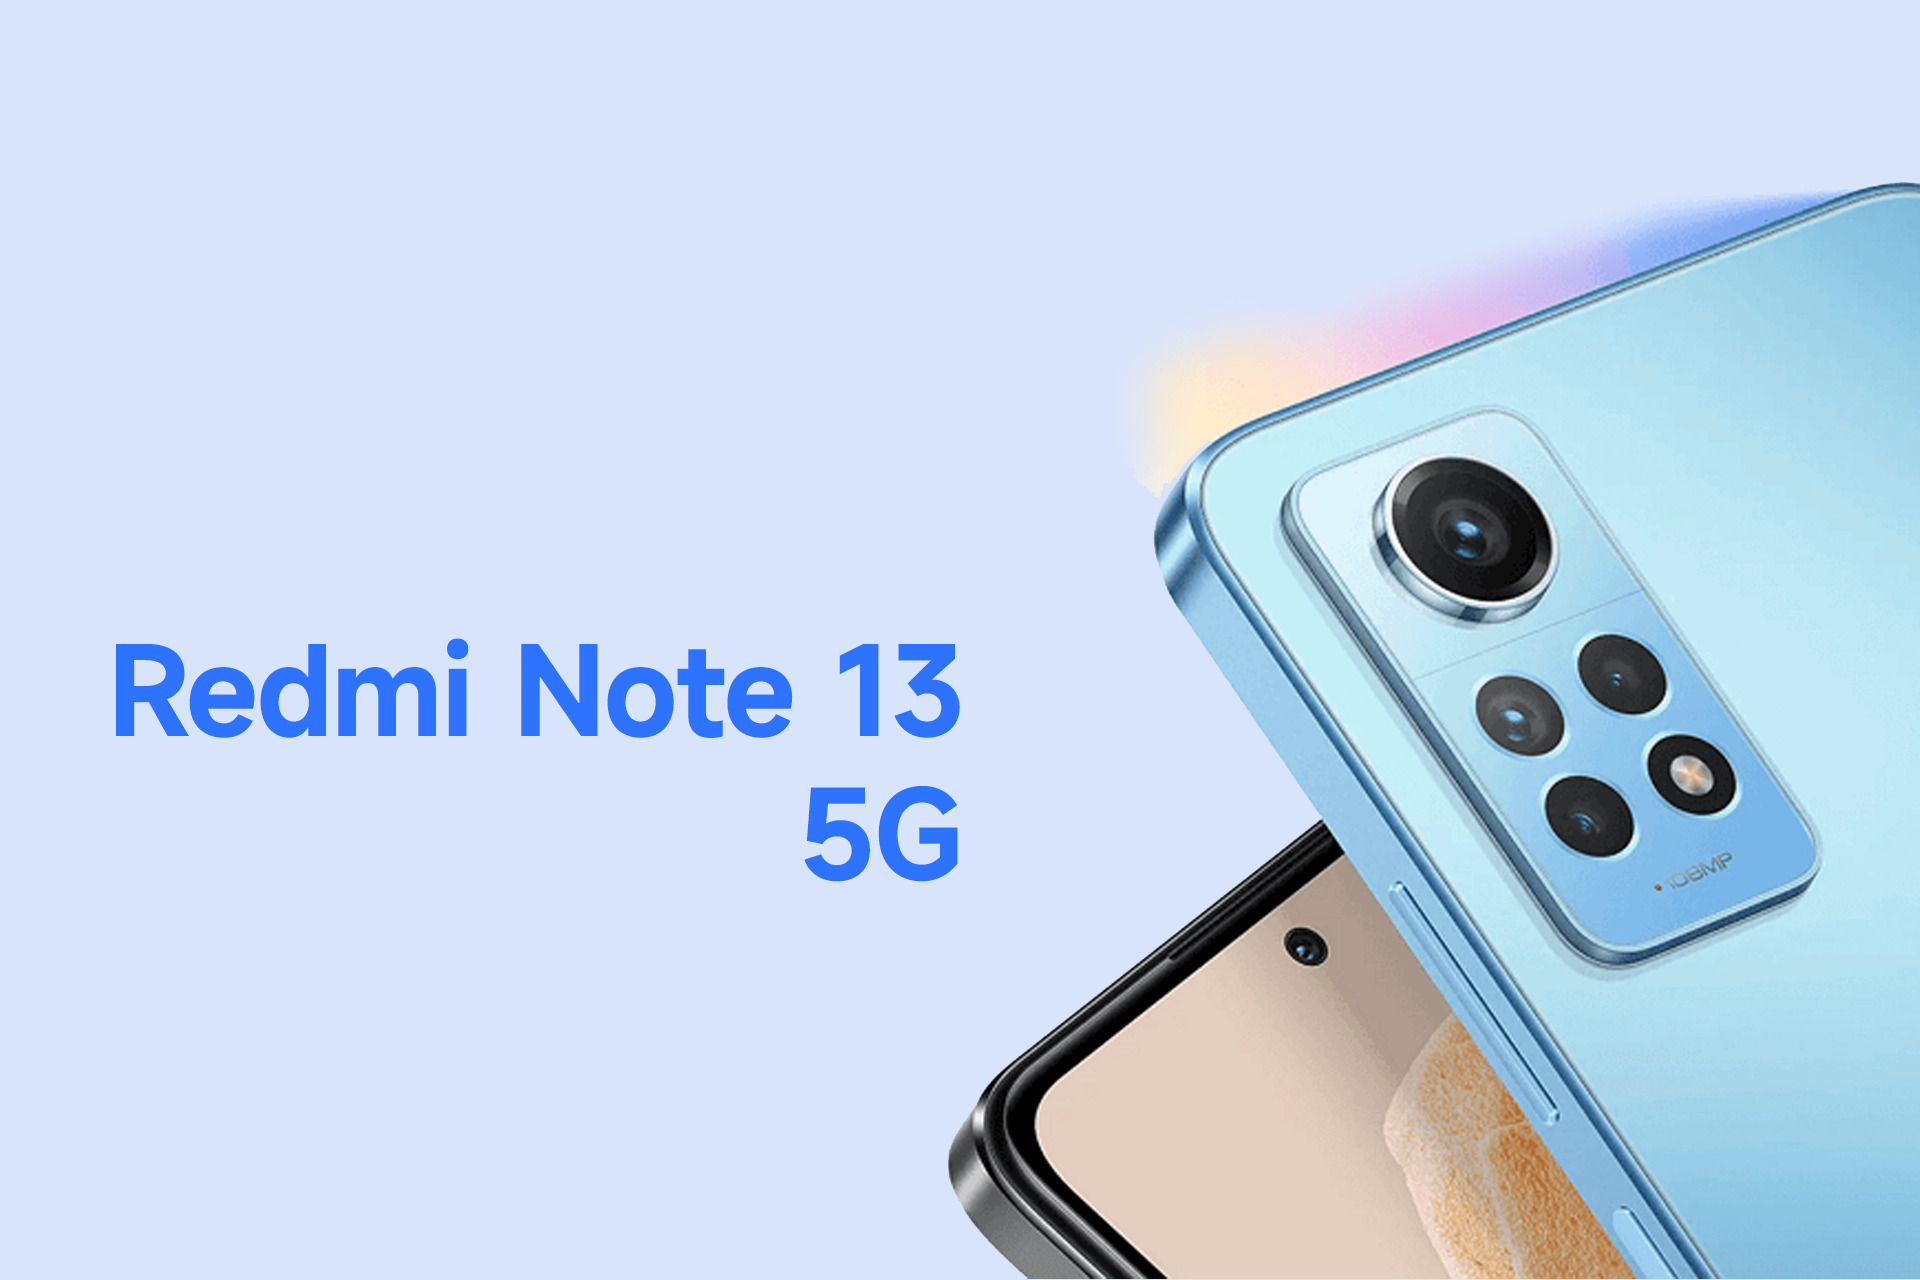 Comparing Redmi Note 13 5G with Note 13 Pro 5G: what upgrades does